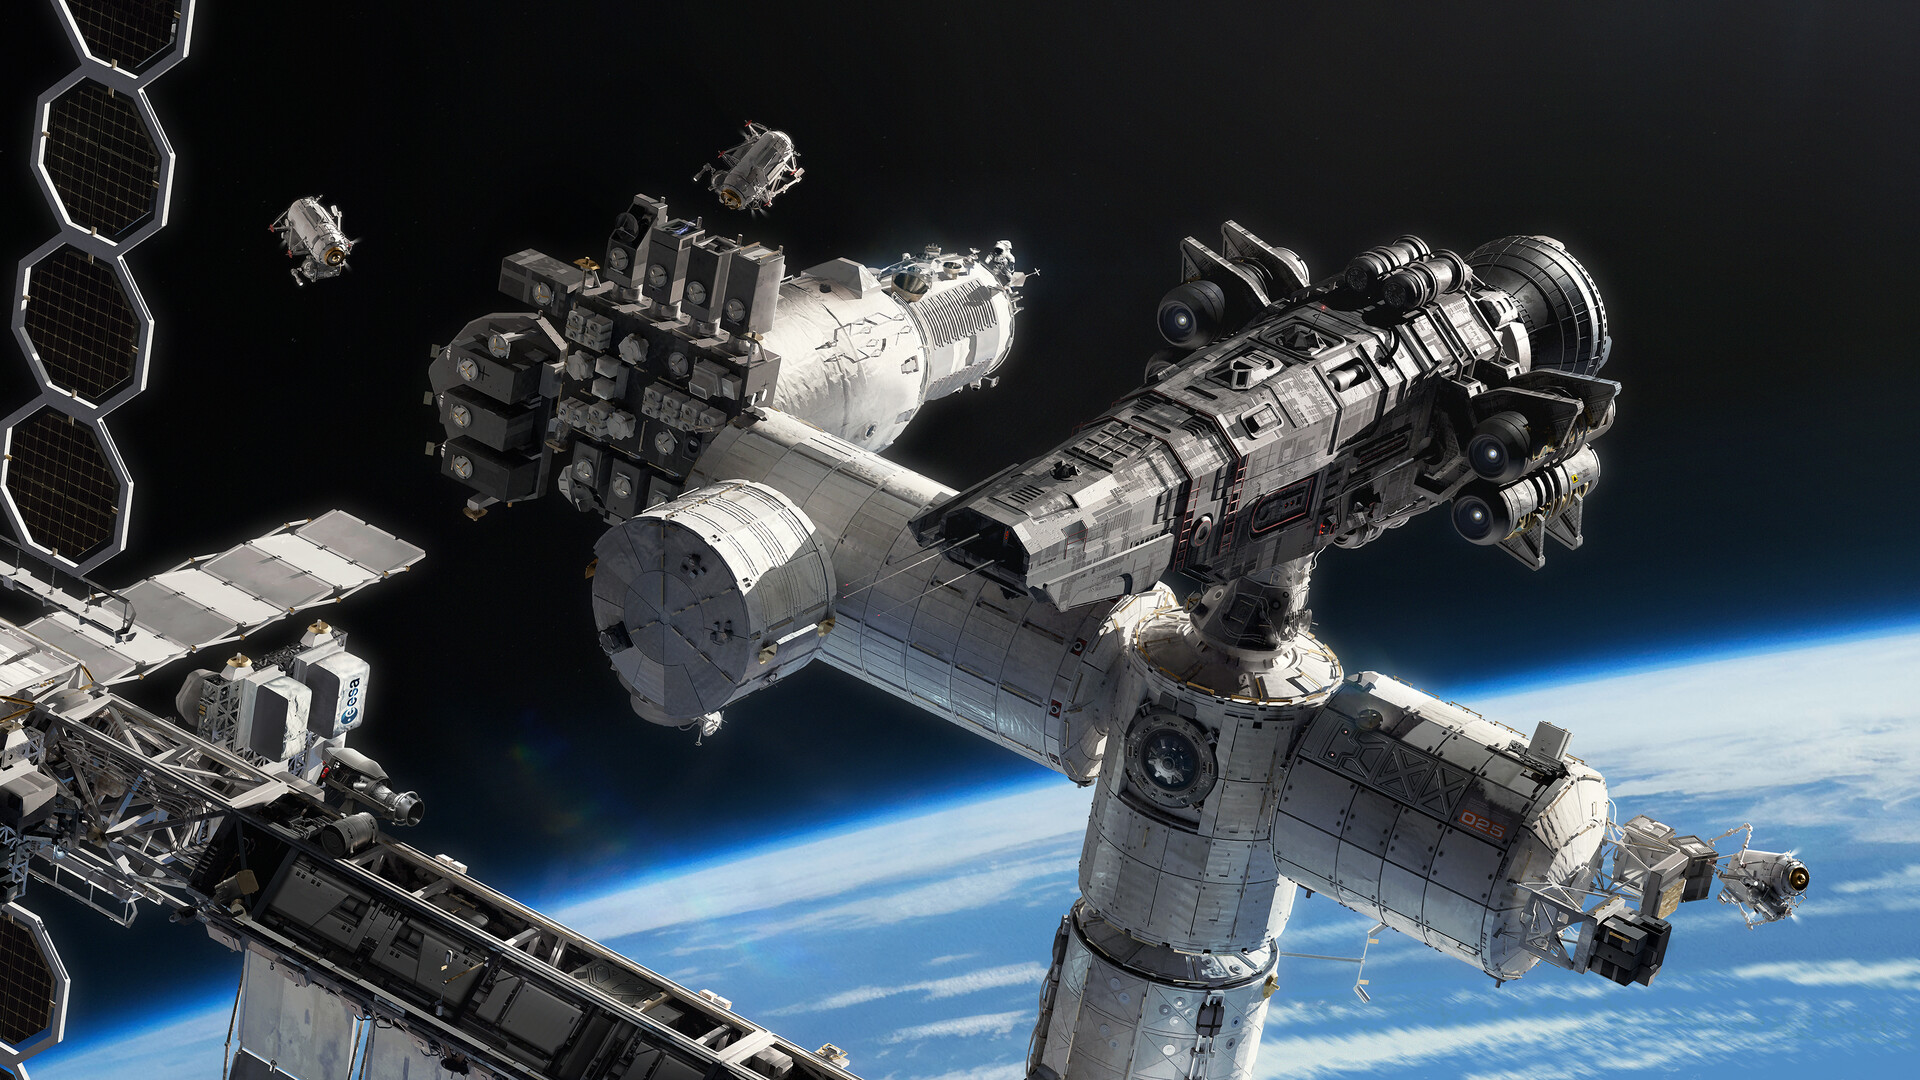 General 1920x1080 artwork space space station